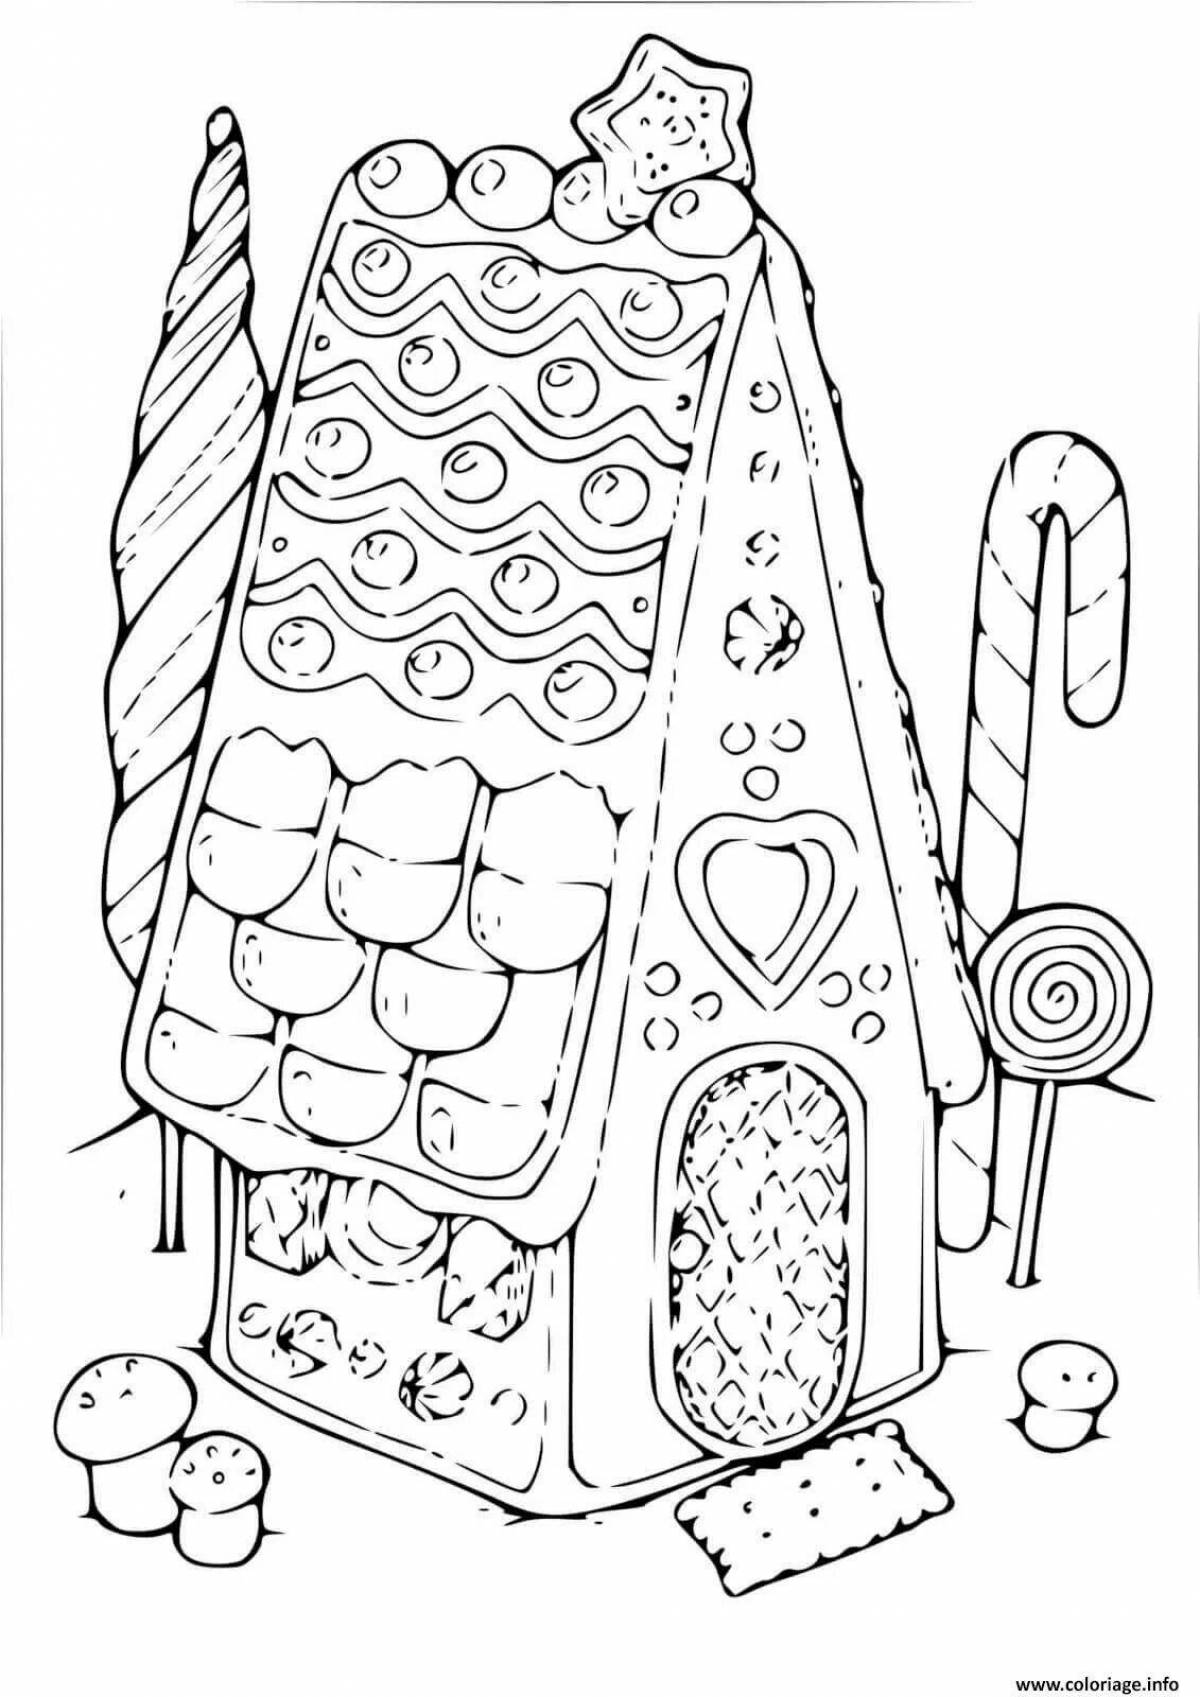 Christmas gingerbread house coloring page